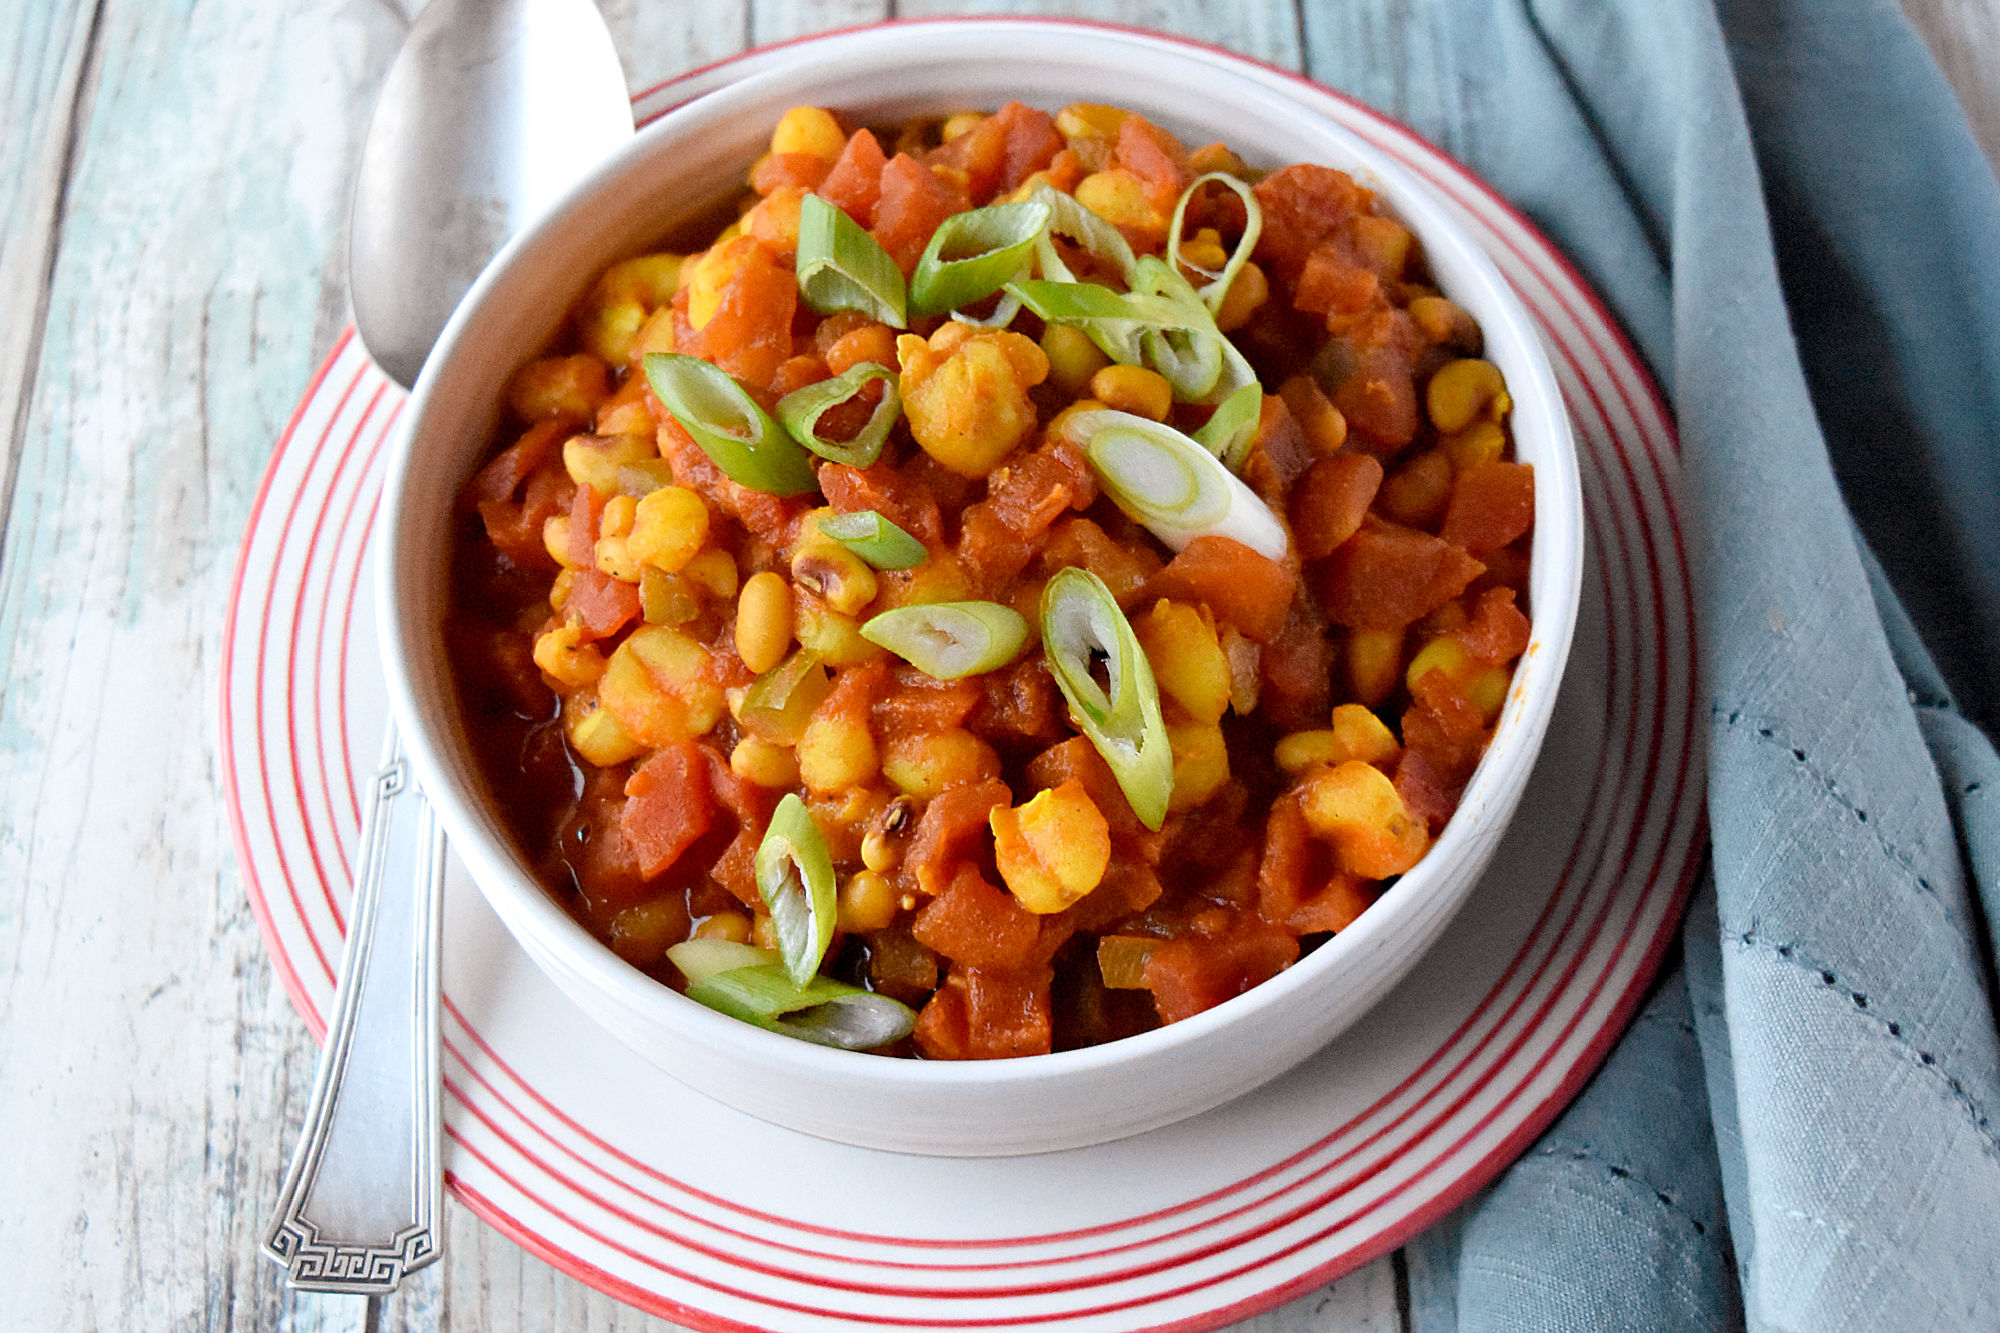 Quick Samp and Beans has delicious curry and tomato flavors.